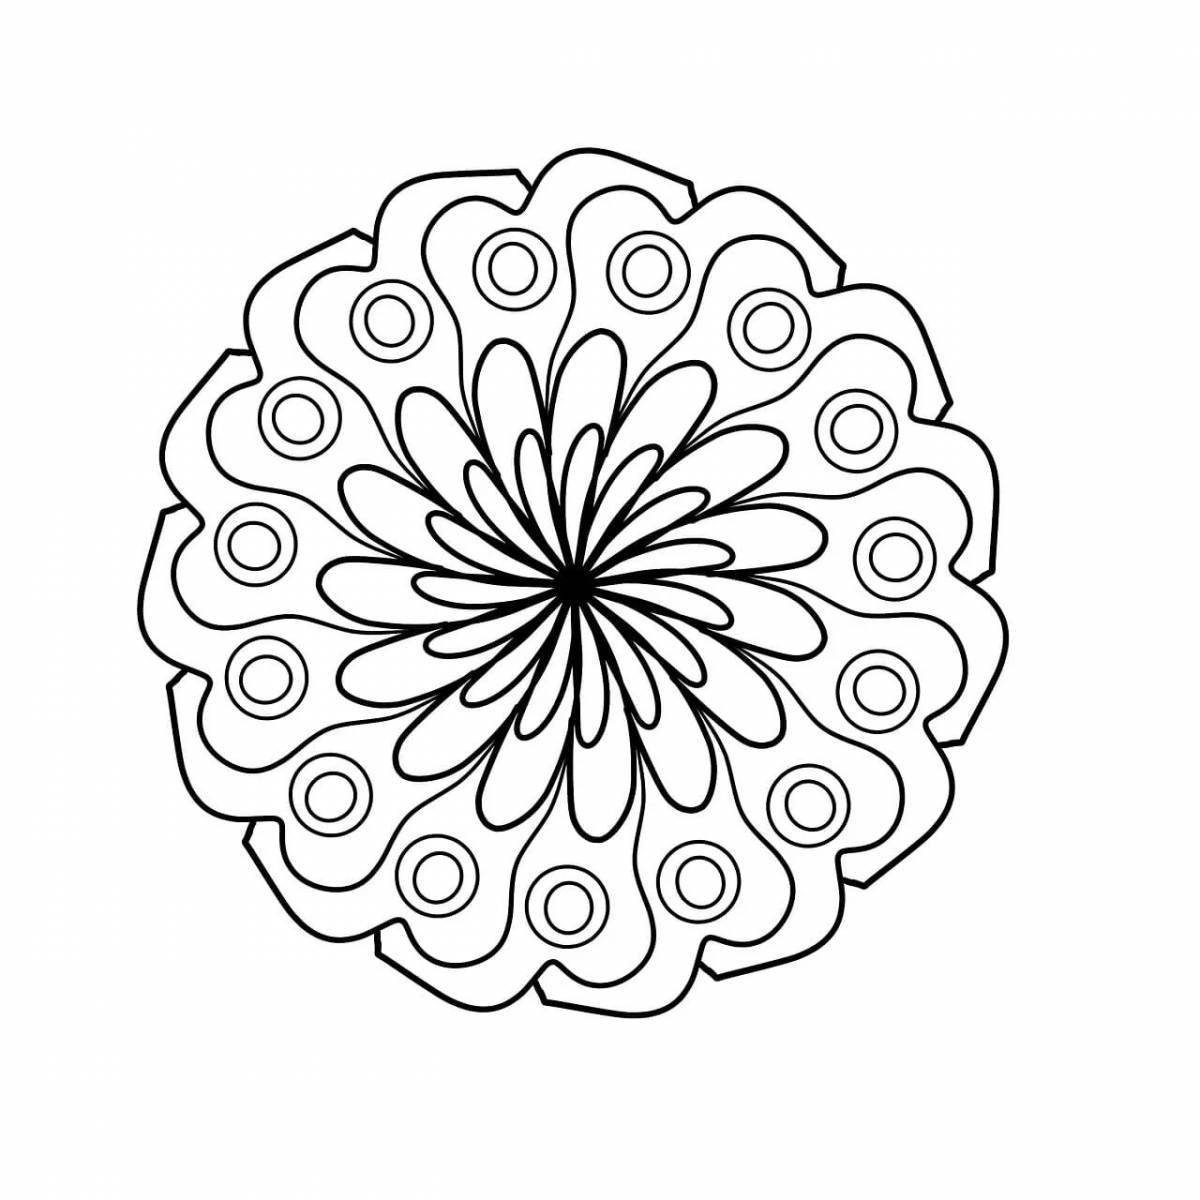 Coloring page with bright light pattern